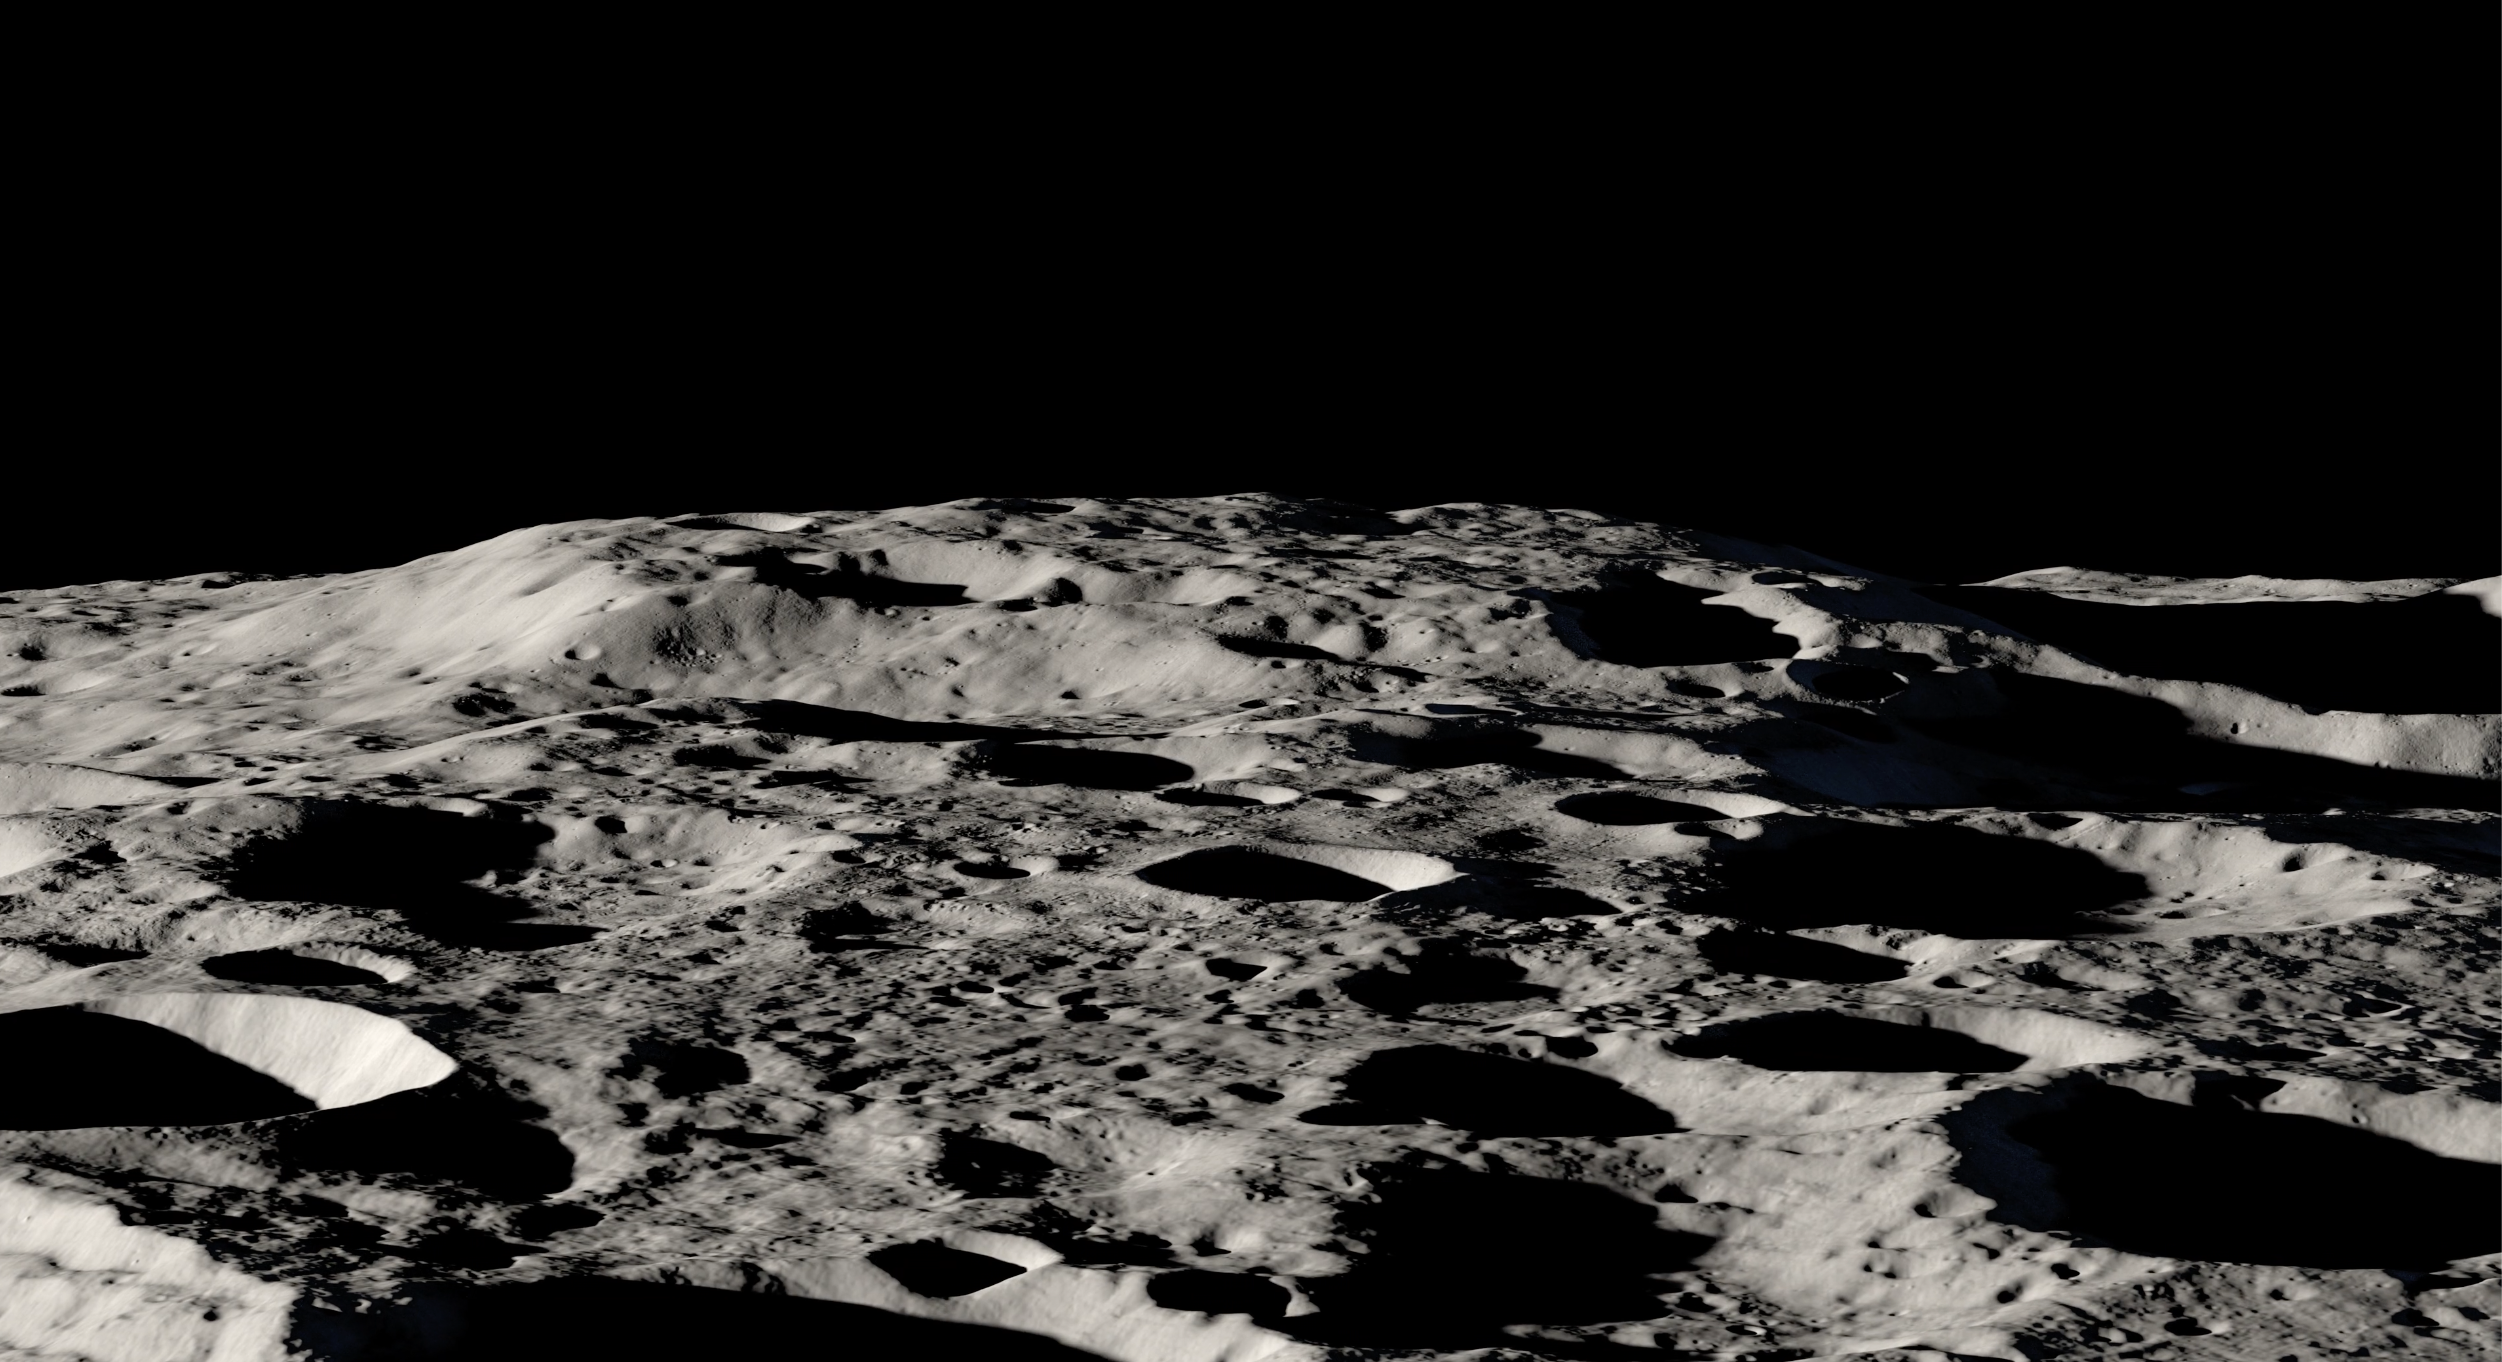 Illustration of Mons Mouton, a mesa-like lunar mountain that towers over the crater-carved landscape near the moon's south pole.